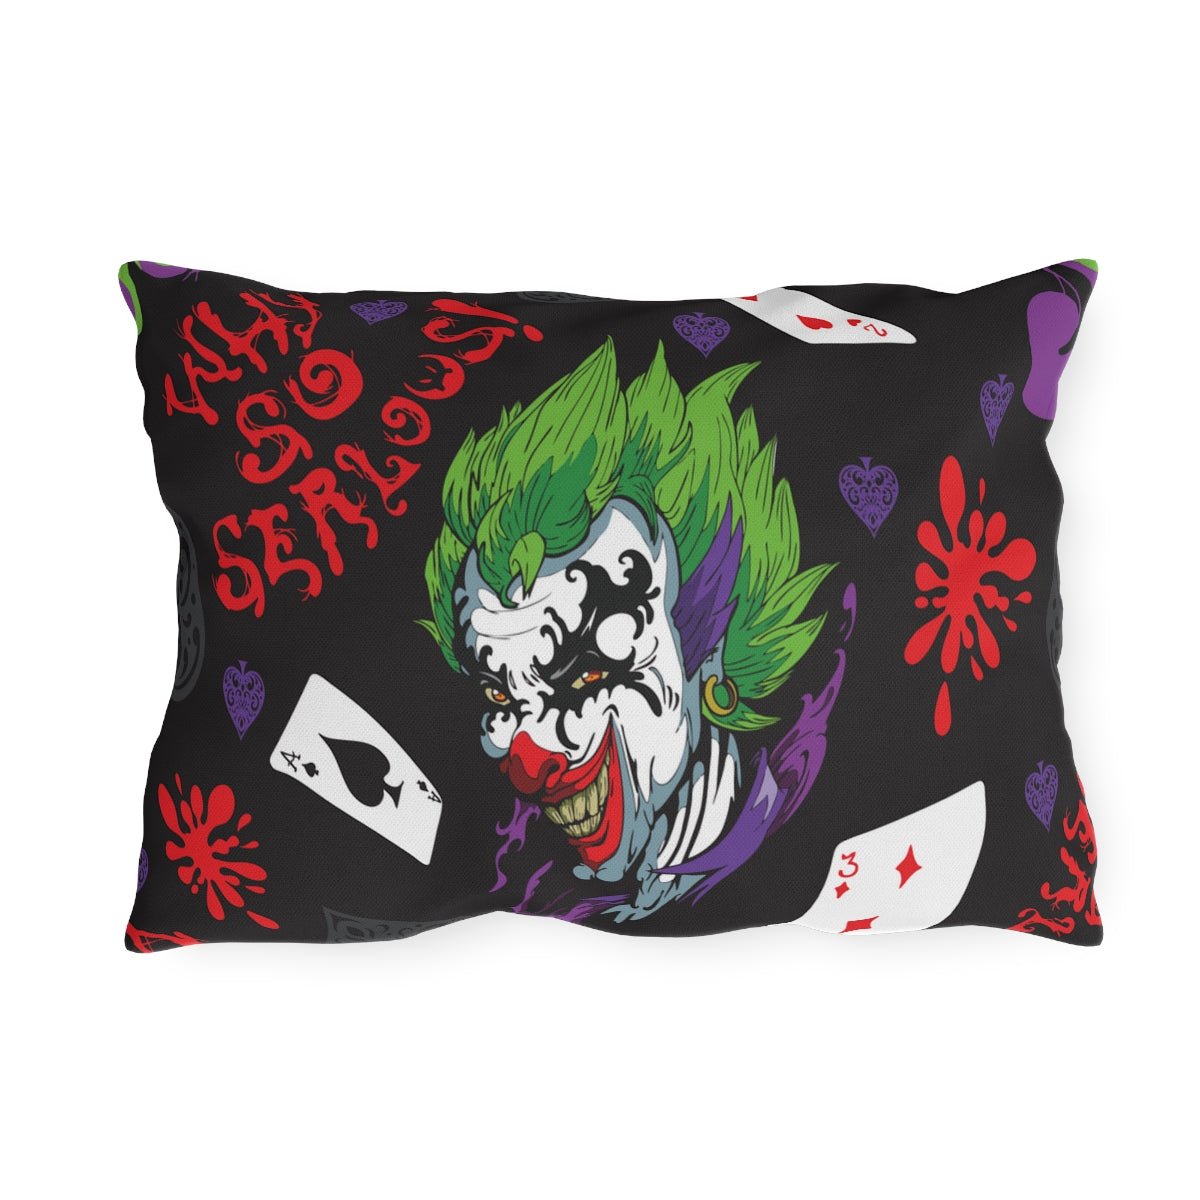 Joker and Poker Cards Outdoor Pillow - Puffin Lime